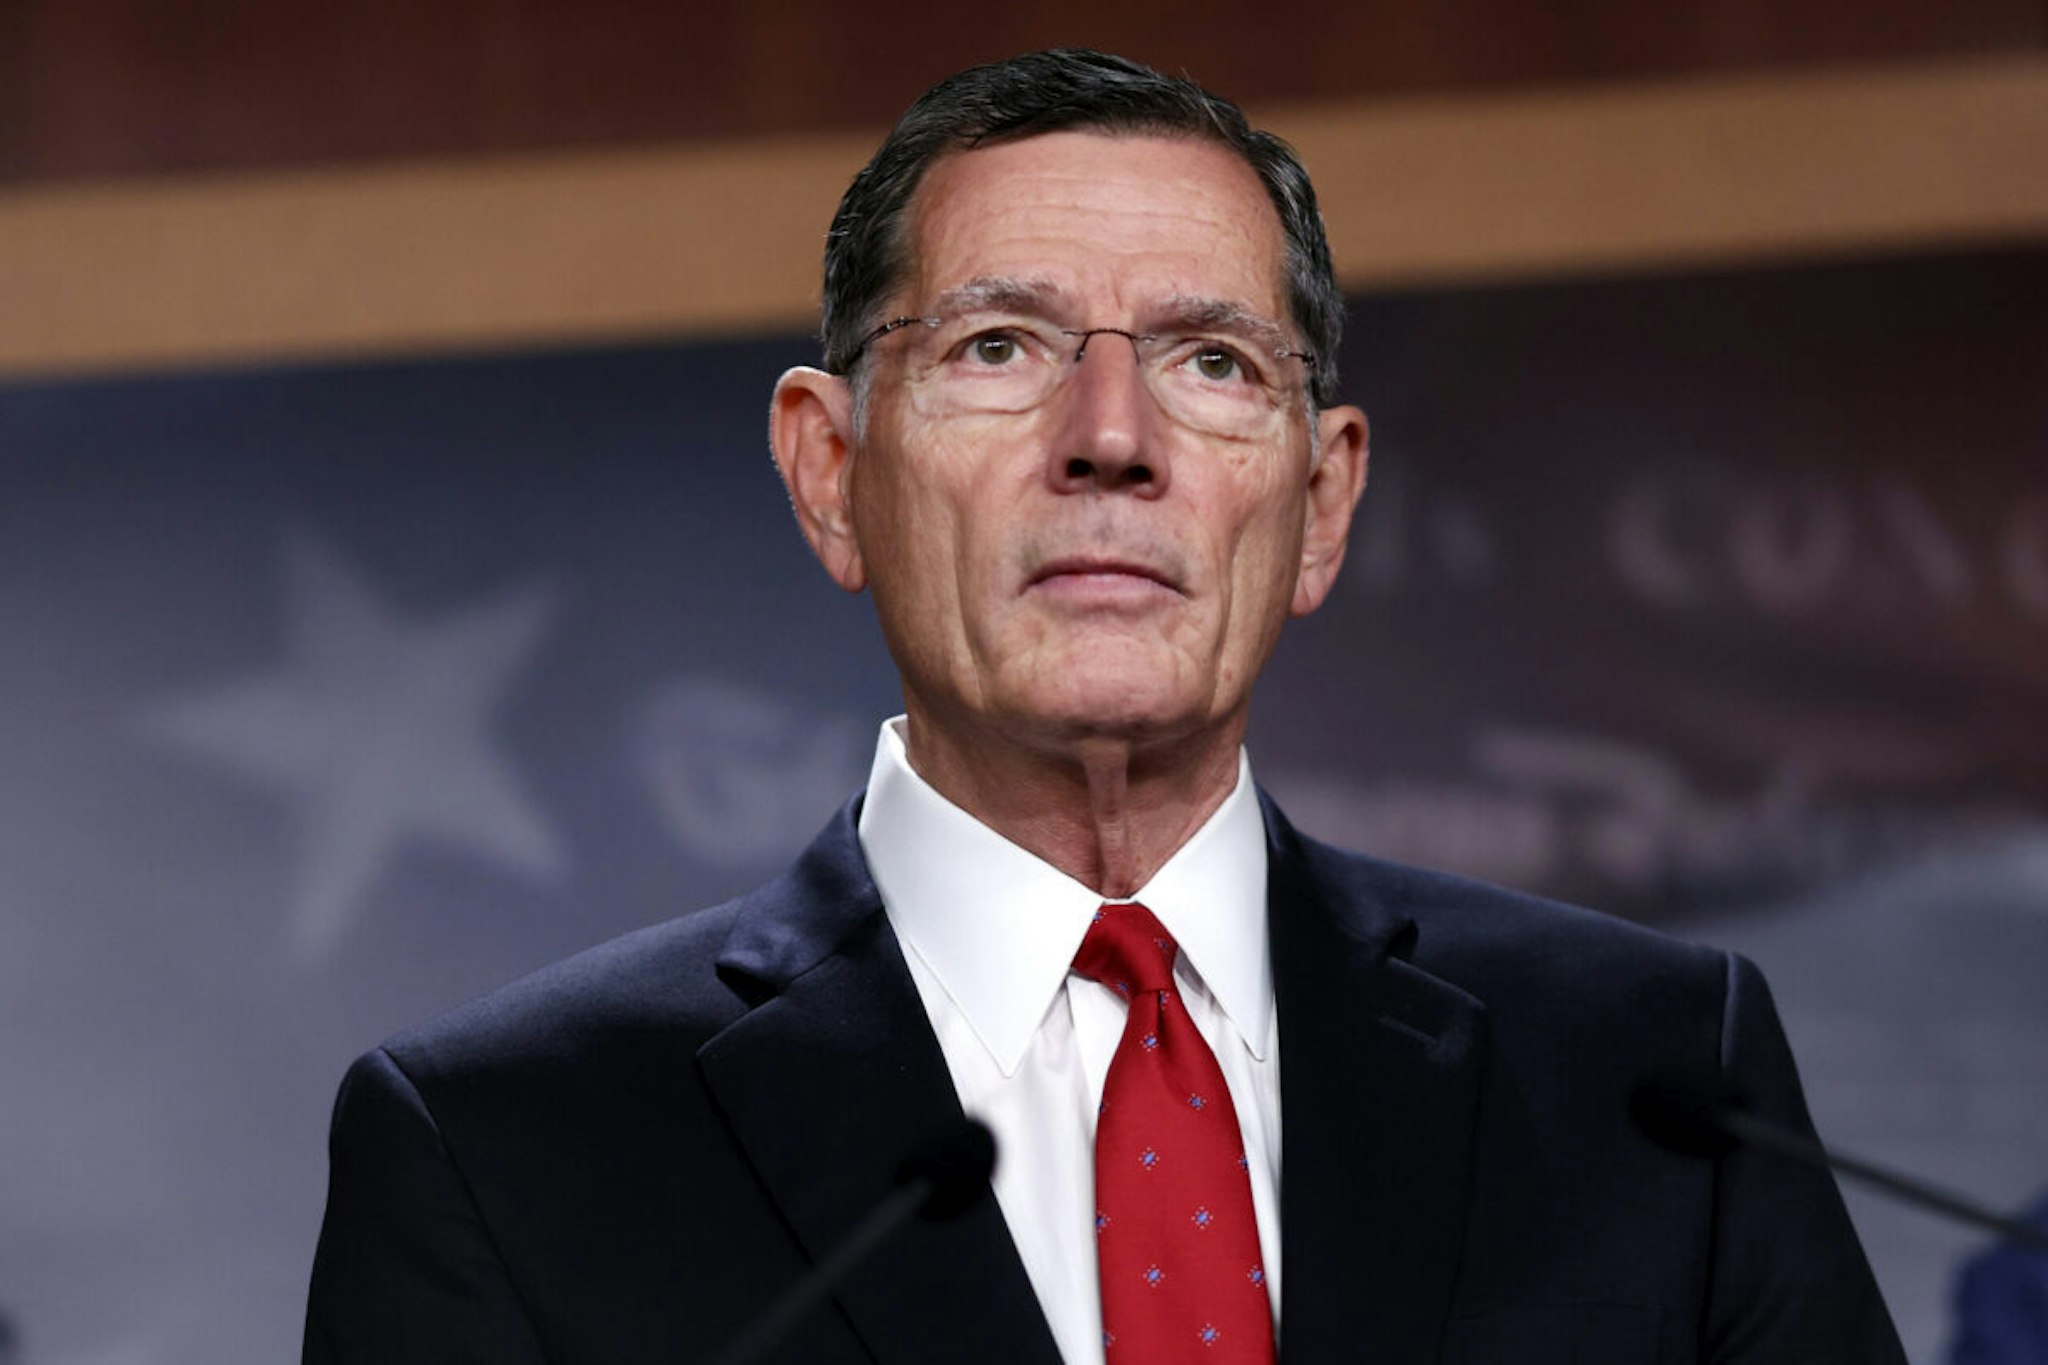 WASHINGTON, DC - AUGUST 05: U.S. Sen. John Barrasso (R-WY) speaks at a press conference at the U.S. Capitol on August 05, 2022 in Washington, DC. The group of Republican Senators held the press conference to speak out against the Democrats' tax and spending policies.